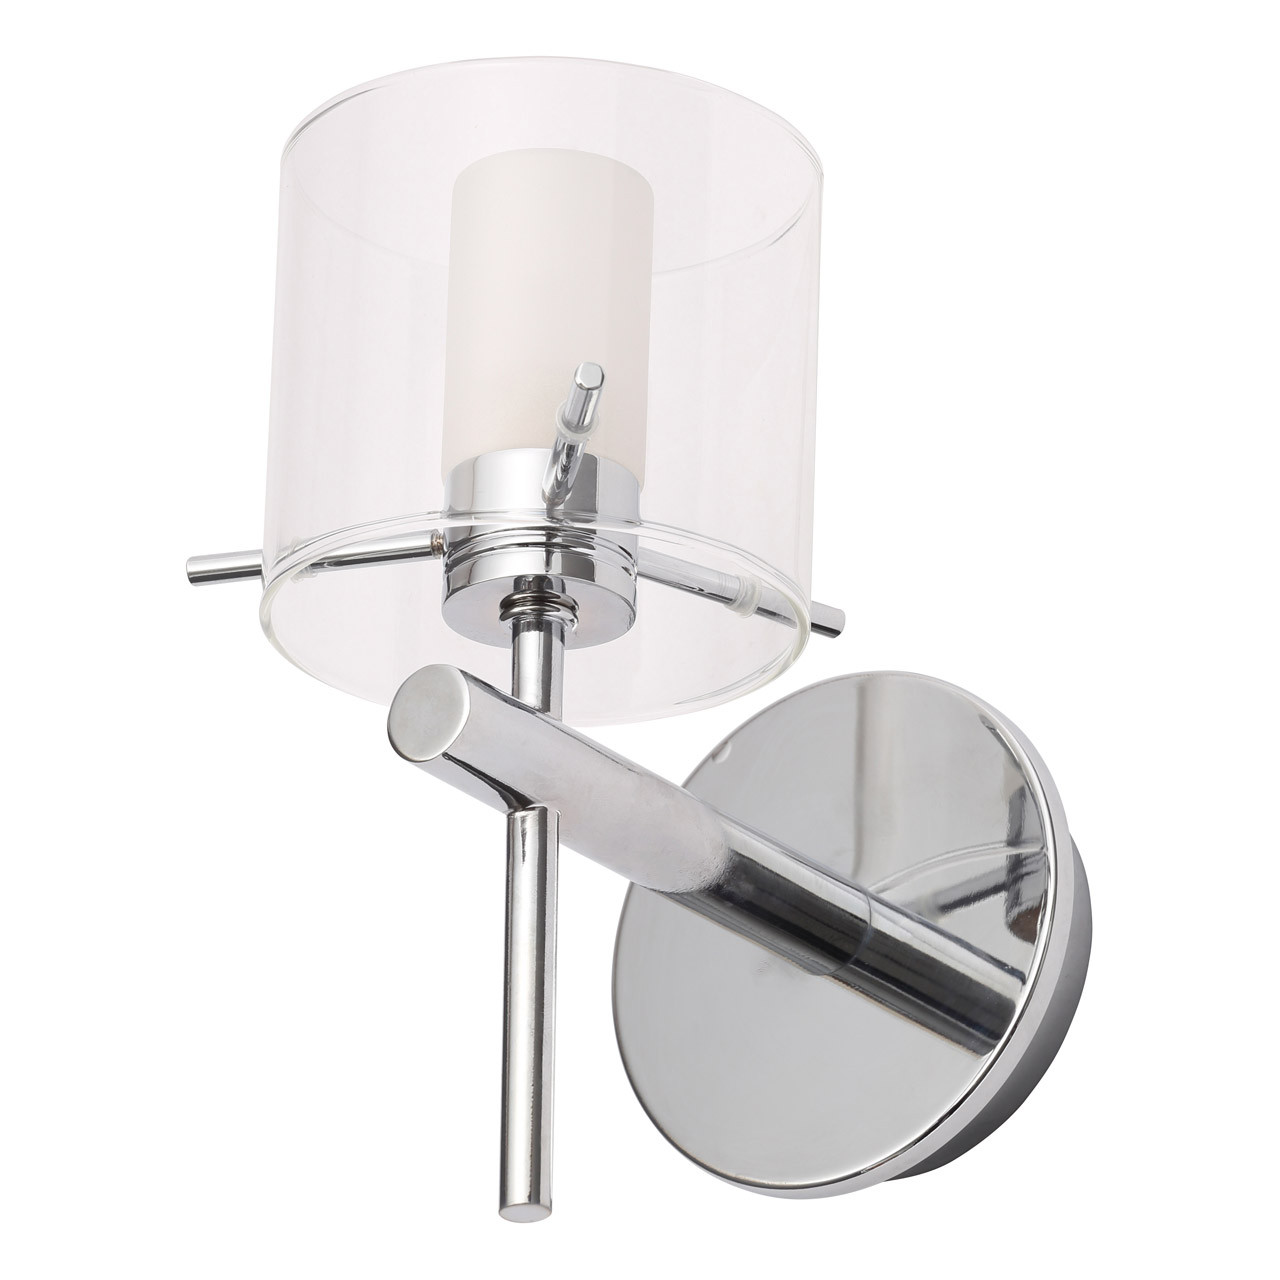 Photos - Chandelier / Lamp SPA Gene Single Cylinder Wall Light Clear Glass and Chrome -31725-CHR 